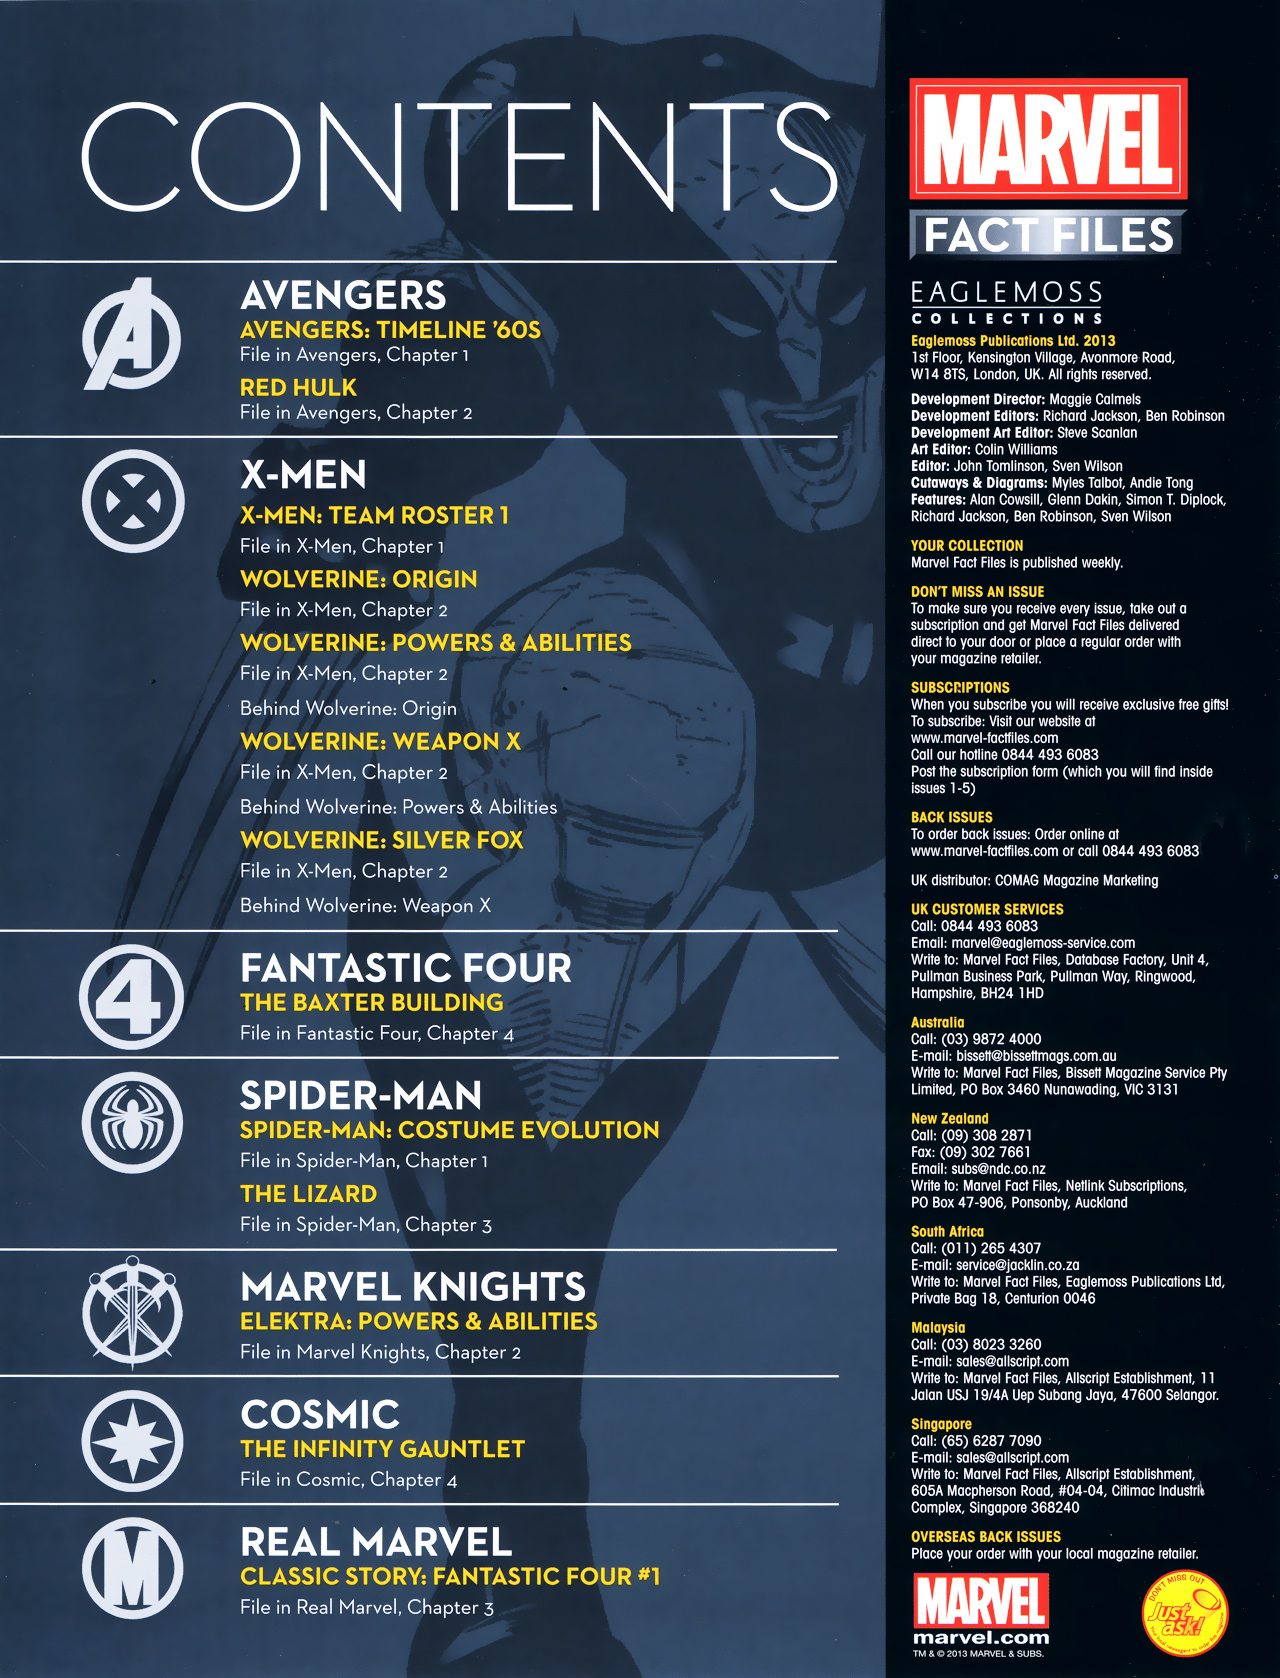 Read online Marvel Fact Files comic -  Issue #1 - 2